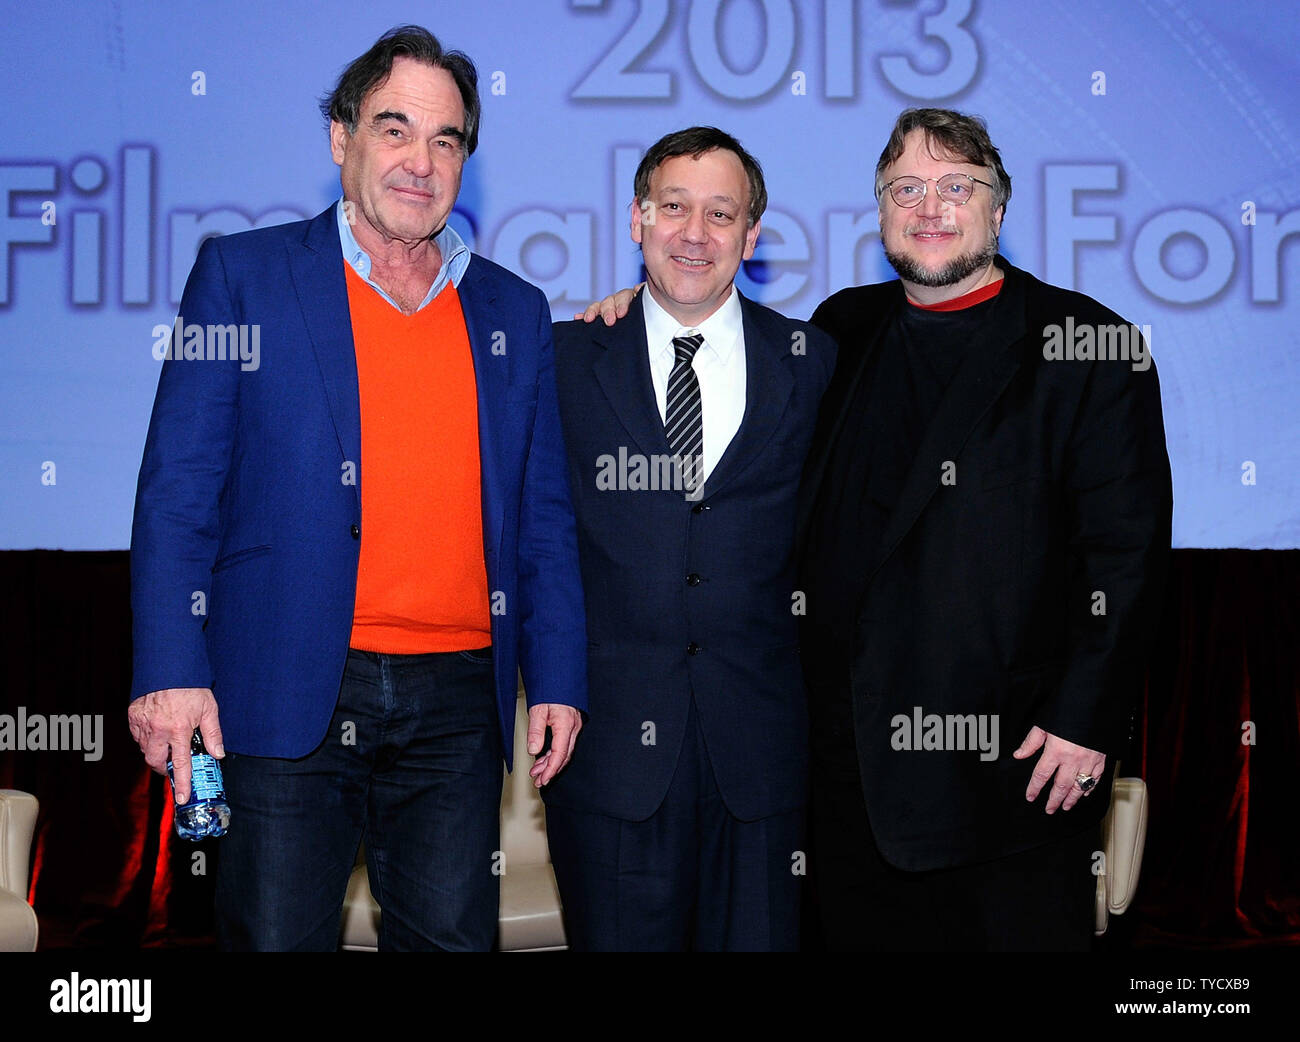 (L-R) Directors Oliver Stone, Sam Raimi and Guillermo del Toro pose after speaking at a filmmakers' roundtable at Caesars Palace during CinemaCon, the official convention of the National Association of Theatre Owners in Las Vegas, Nevada on April 17, 2013. UPI/David Becker Stock Photo